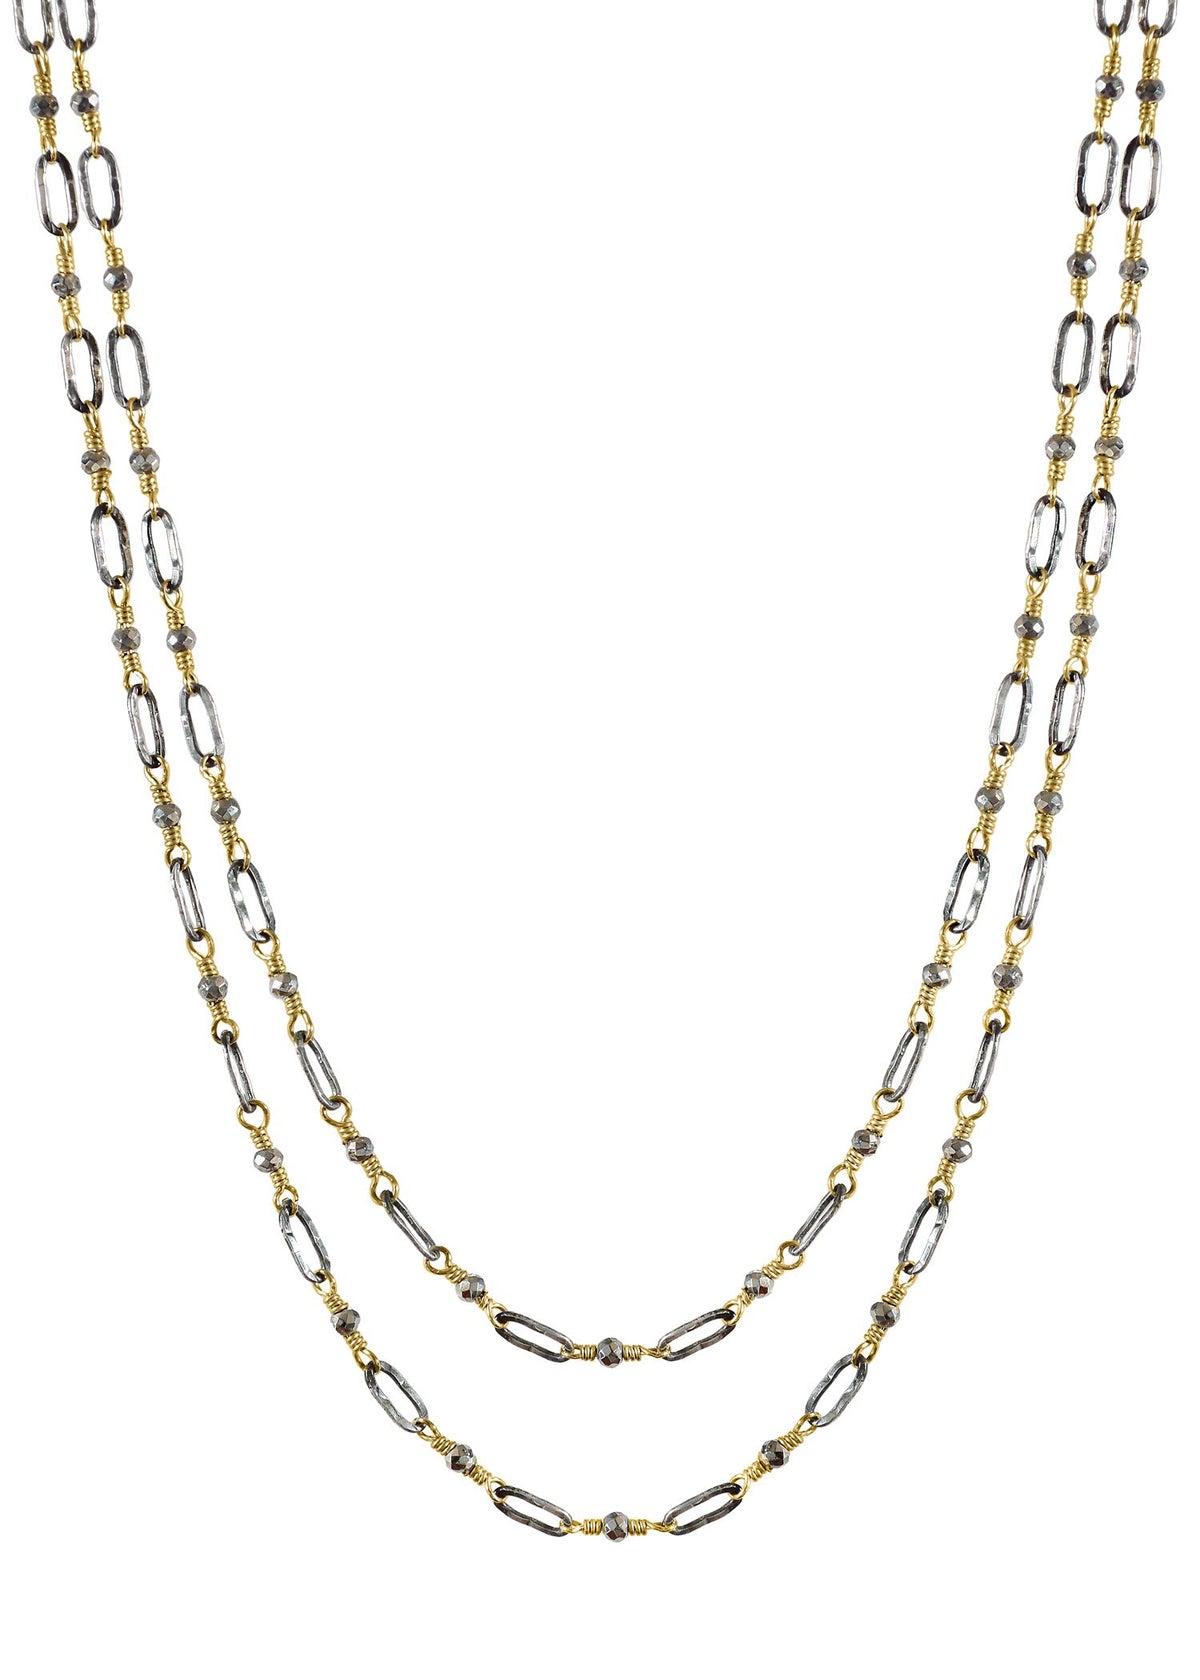 Silver pyrite 14k gold fill Sterling silver Mixed metal Double chain necklace measures 15-1/2” and 16-1/4” in length Handmade in our Los Angeles studio